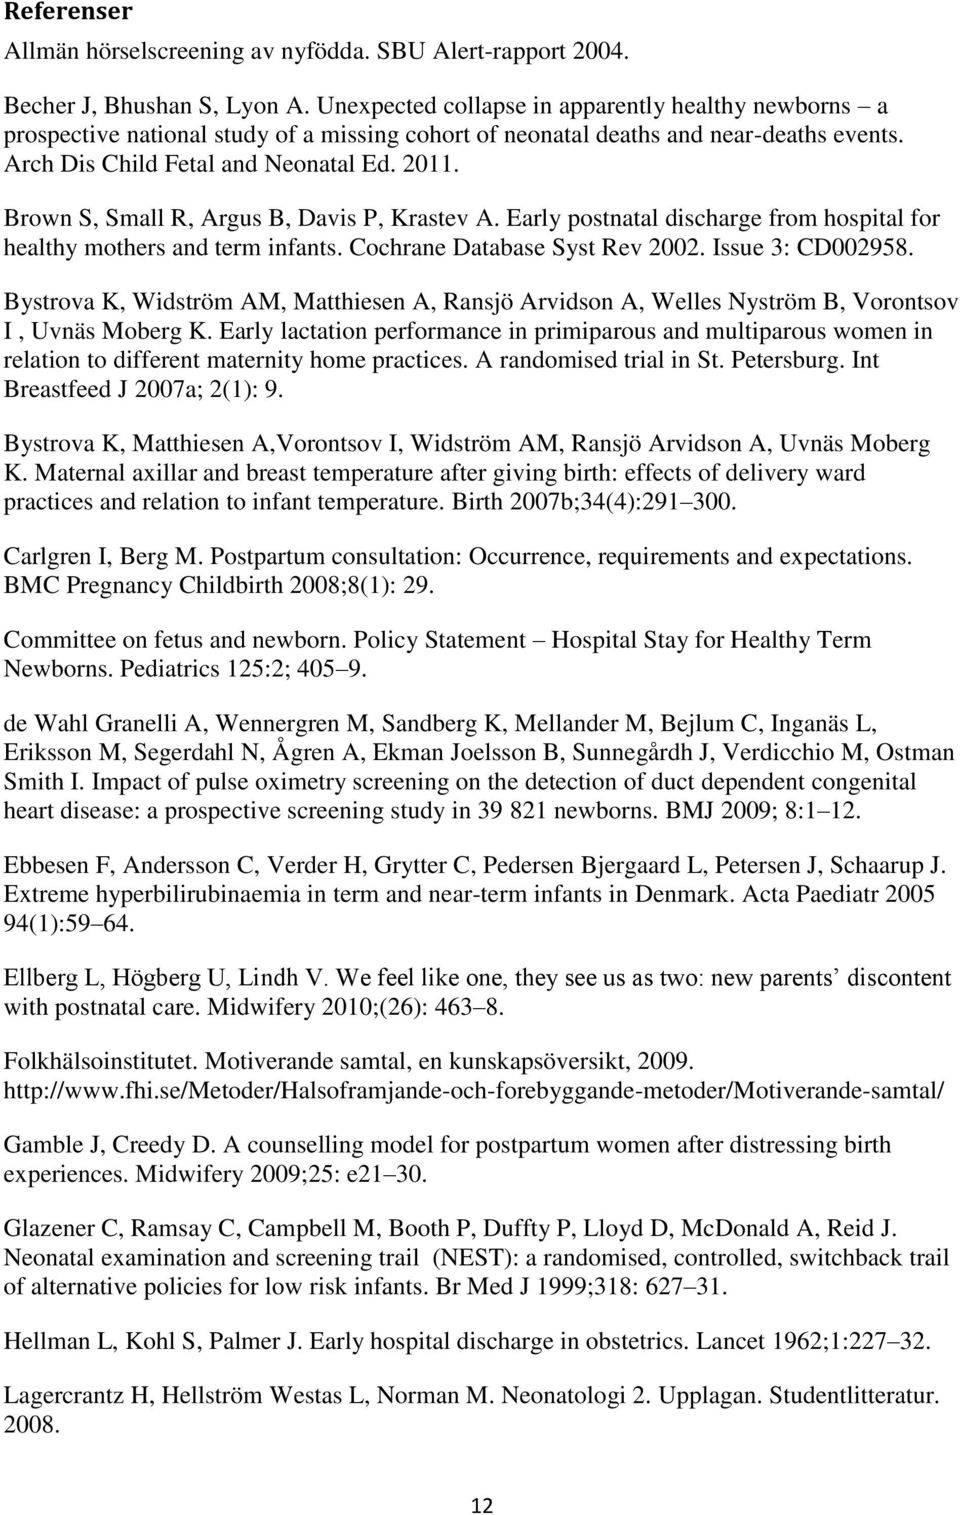 Brown S, Small R, Argus B, Davis P, Krastev A. Early postnatal discharge from hospital for healthy mothers and term infants. Cochrane Database Syst Rev 2002. Issue 3: CD002958.